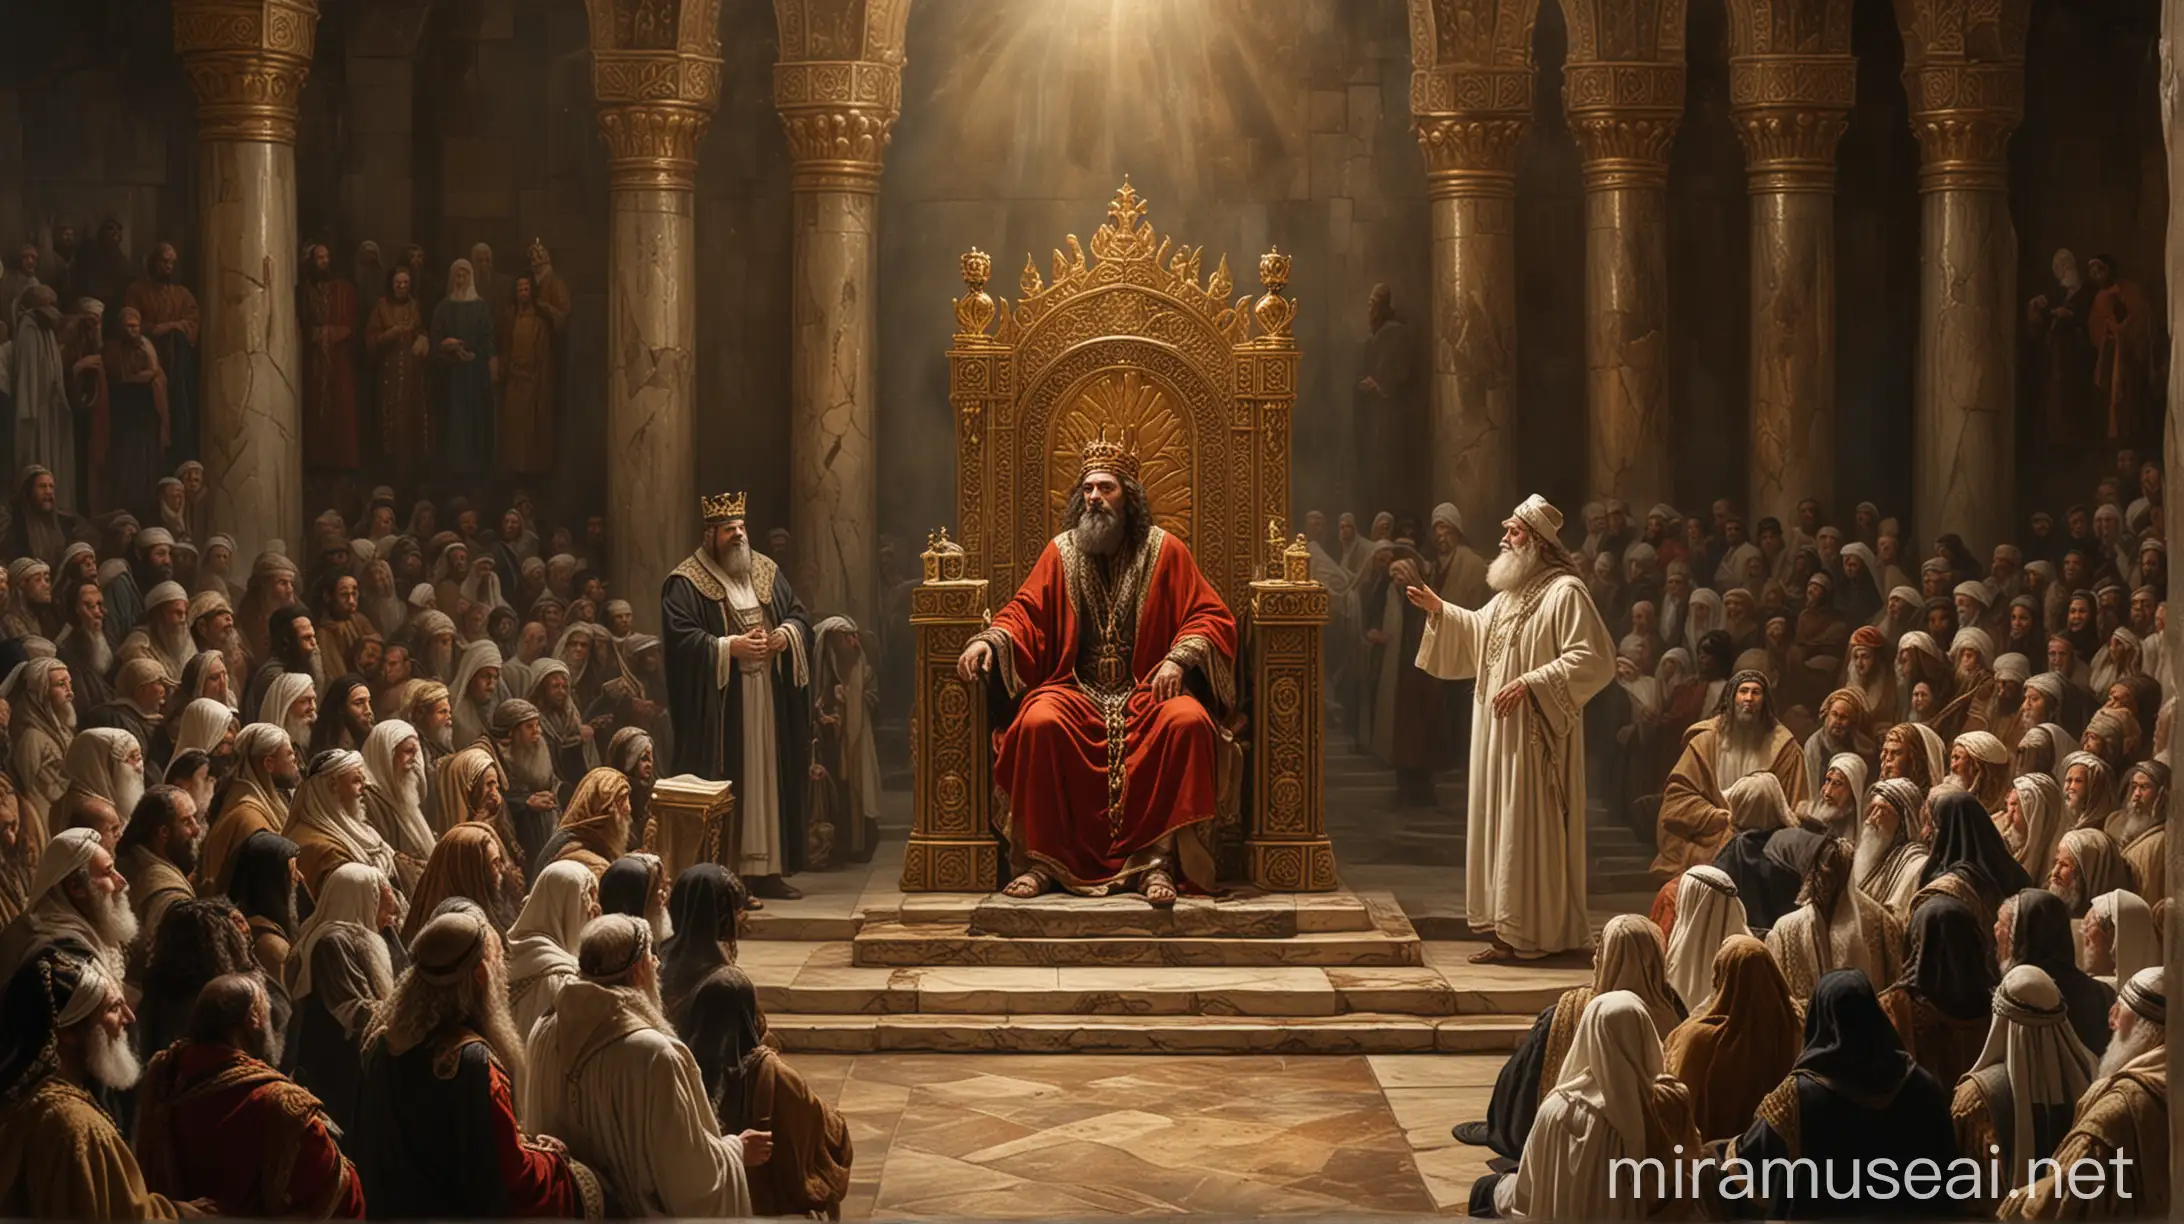 Jewish Prophet Confronts Wicked King in Ancient Court Scene